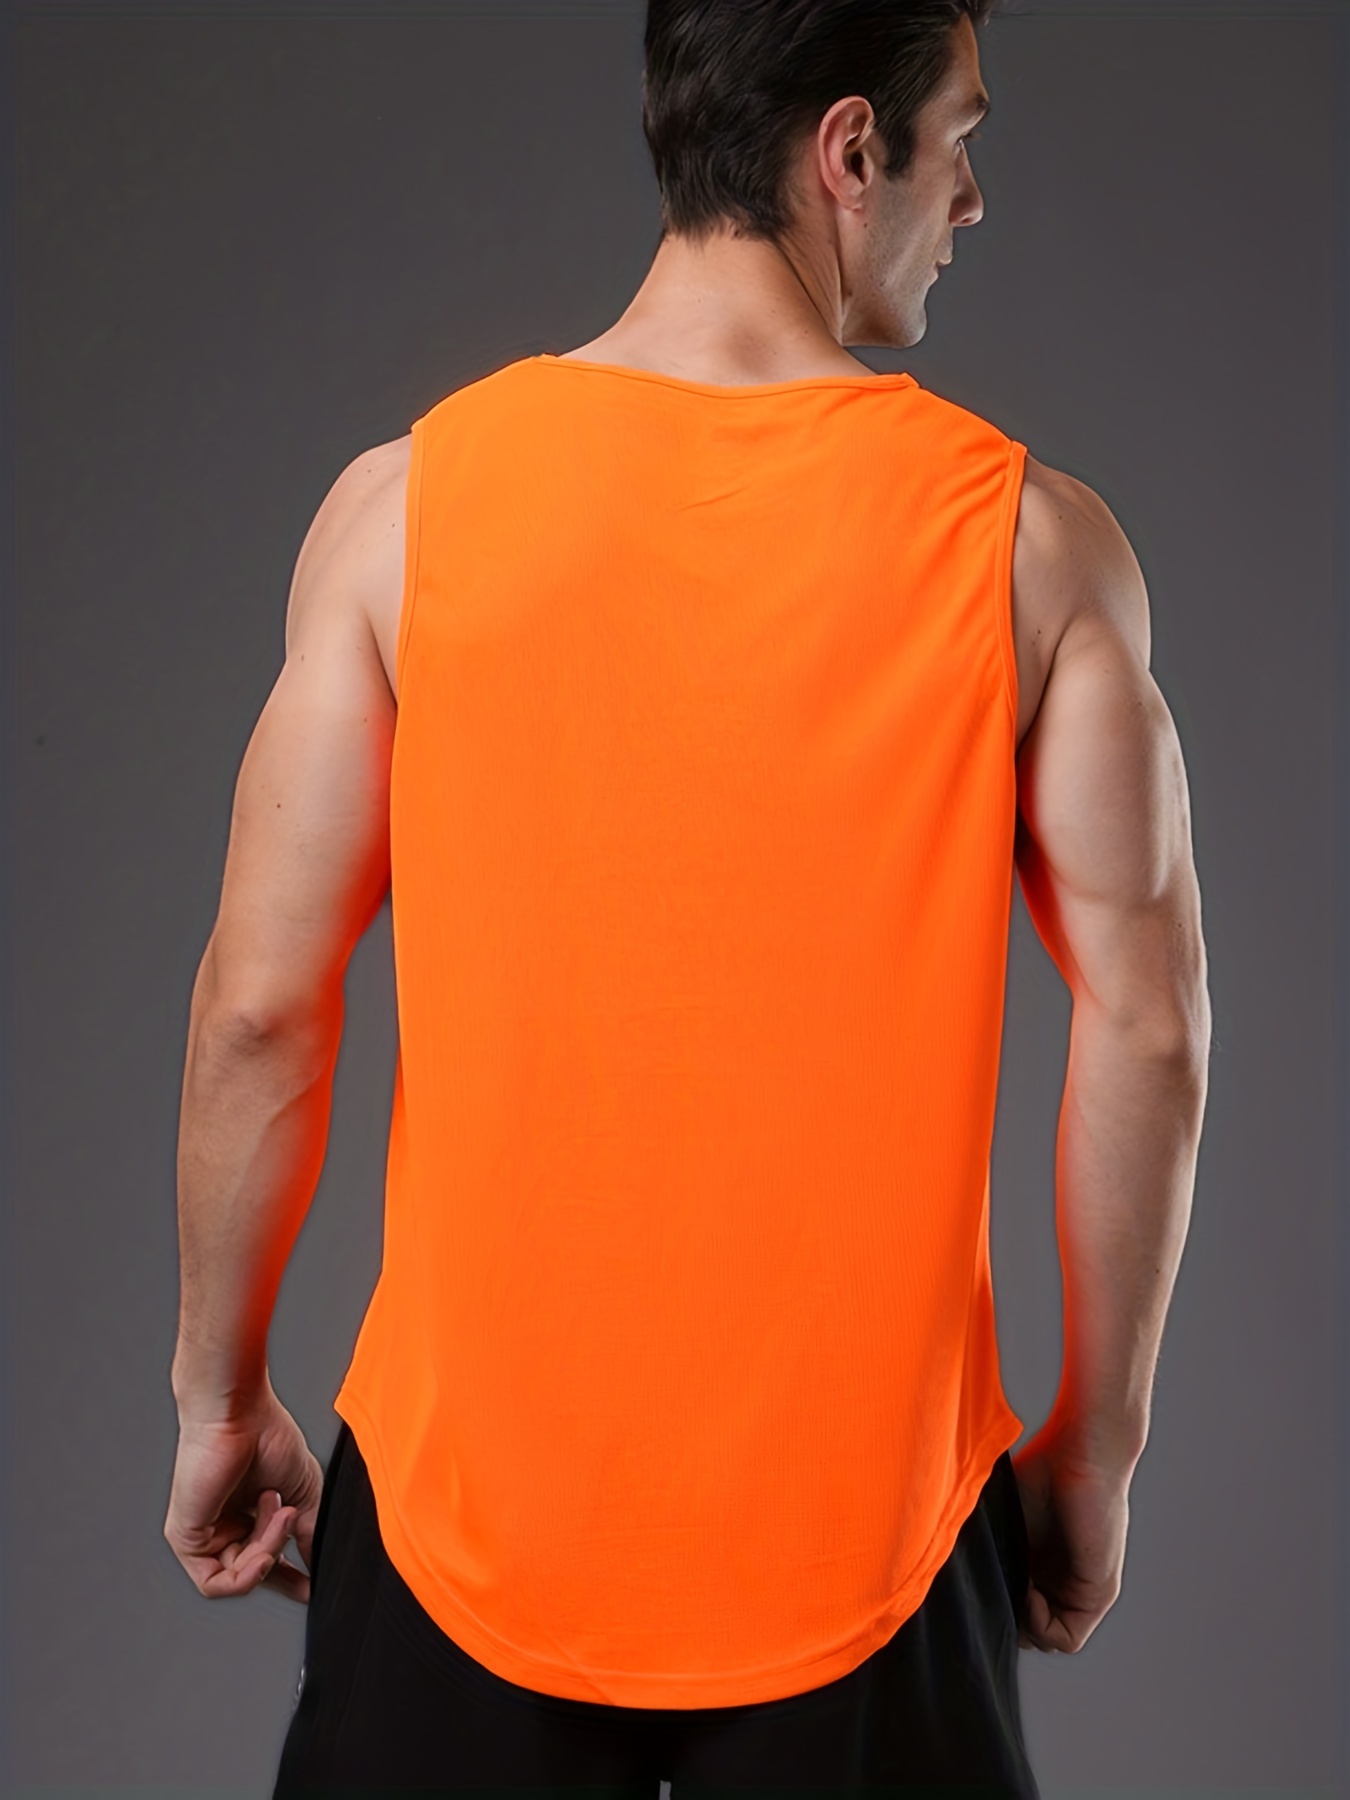 adviicd Tank Top for Men Men Tank Tops Sport Gym Athletic Workout Sleveless  Quick Dry Slim Fitted Shirt Orange,XXXL